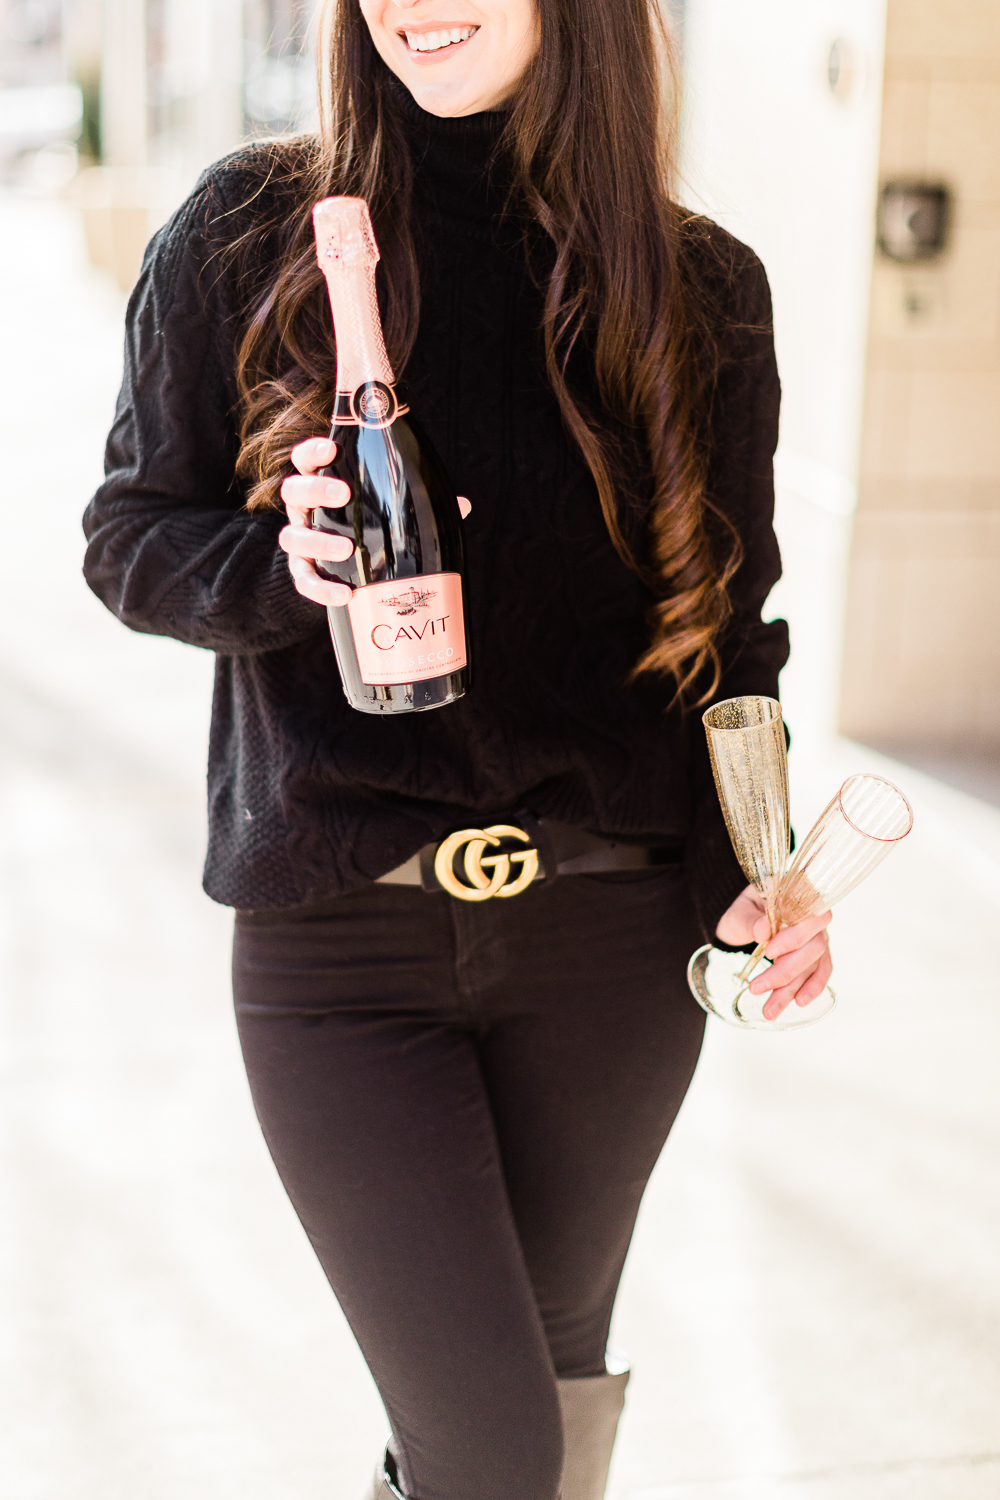 All Black Winter Outfit and The Best Gucci Belt Dupe on Amazon by affordable fashion and southern lifestyle blogger Stephanie Ziajka from Diary of a Debutante, Gucci Marmont belt dupe, gucci belt dupe amazon, all black winter outfit ideas